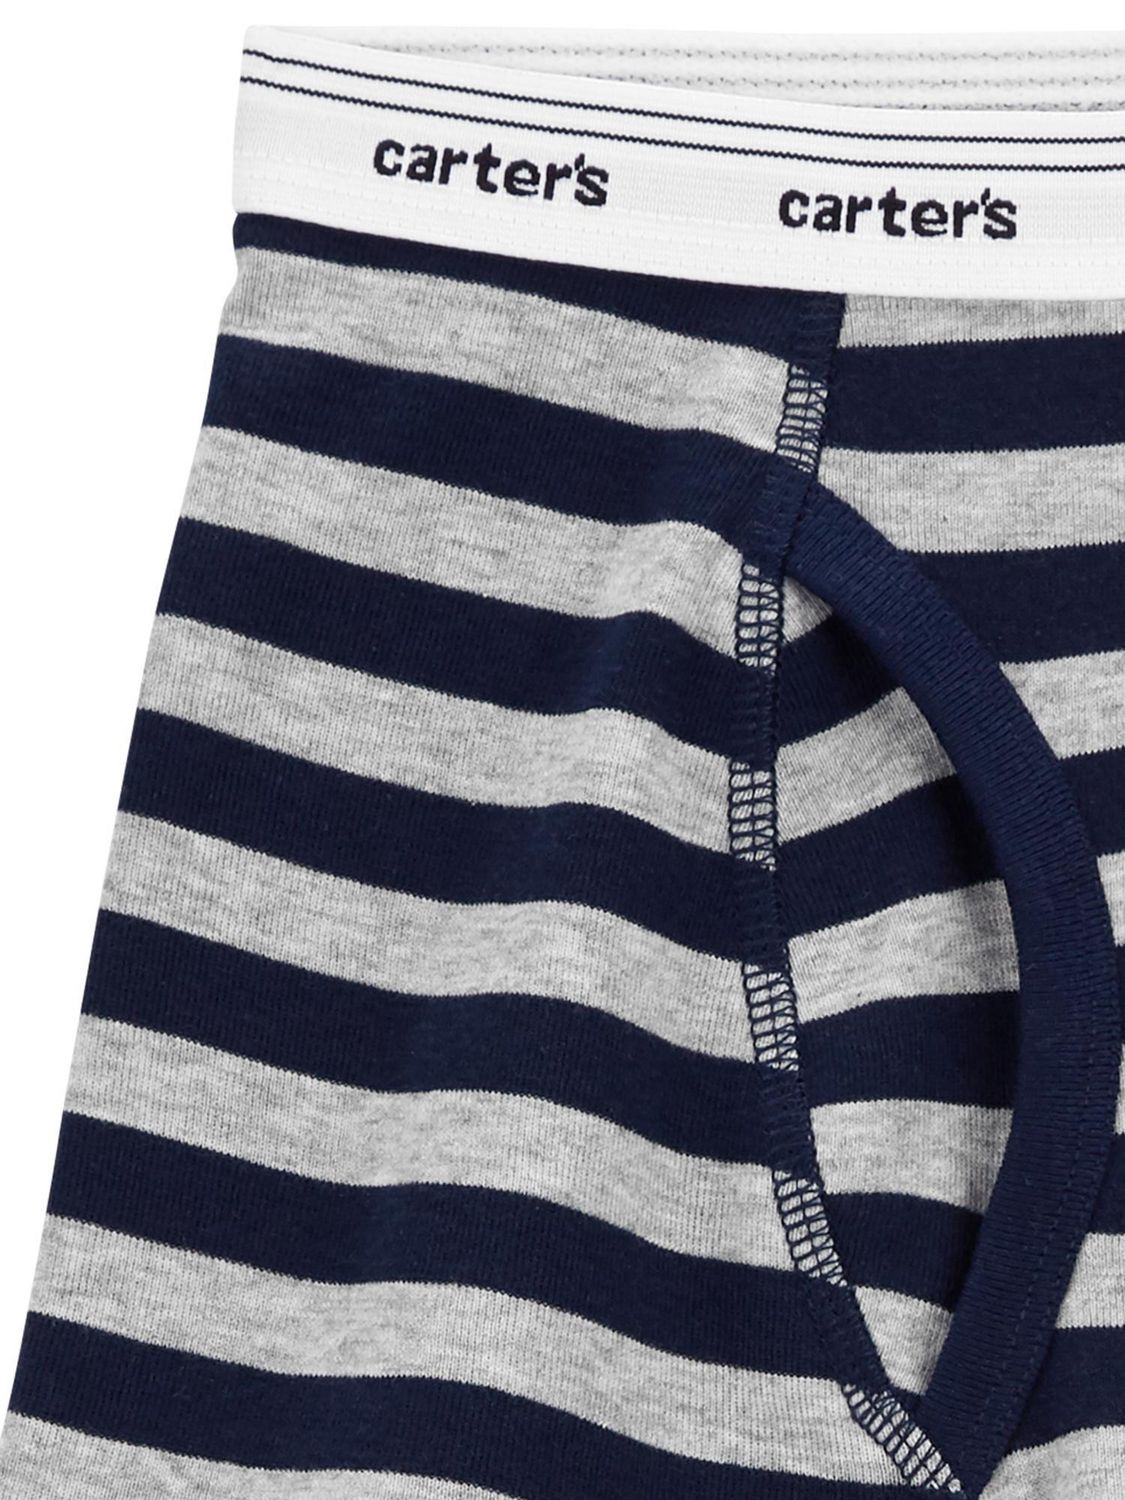 Carter And White - Kids Classic Underwear 2-piece Set - Boxers